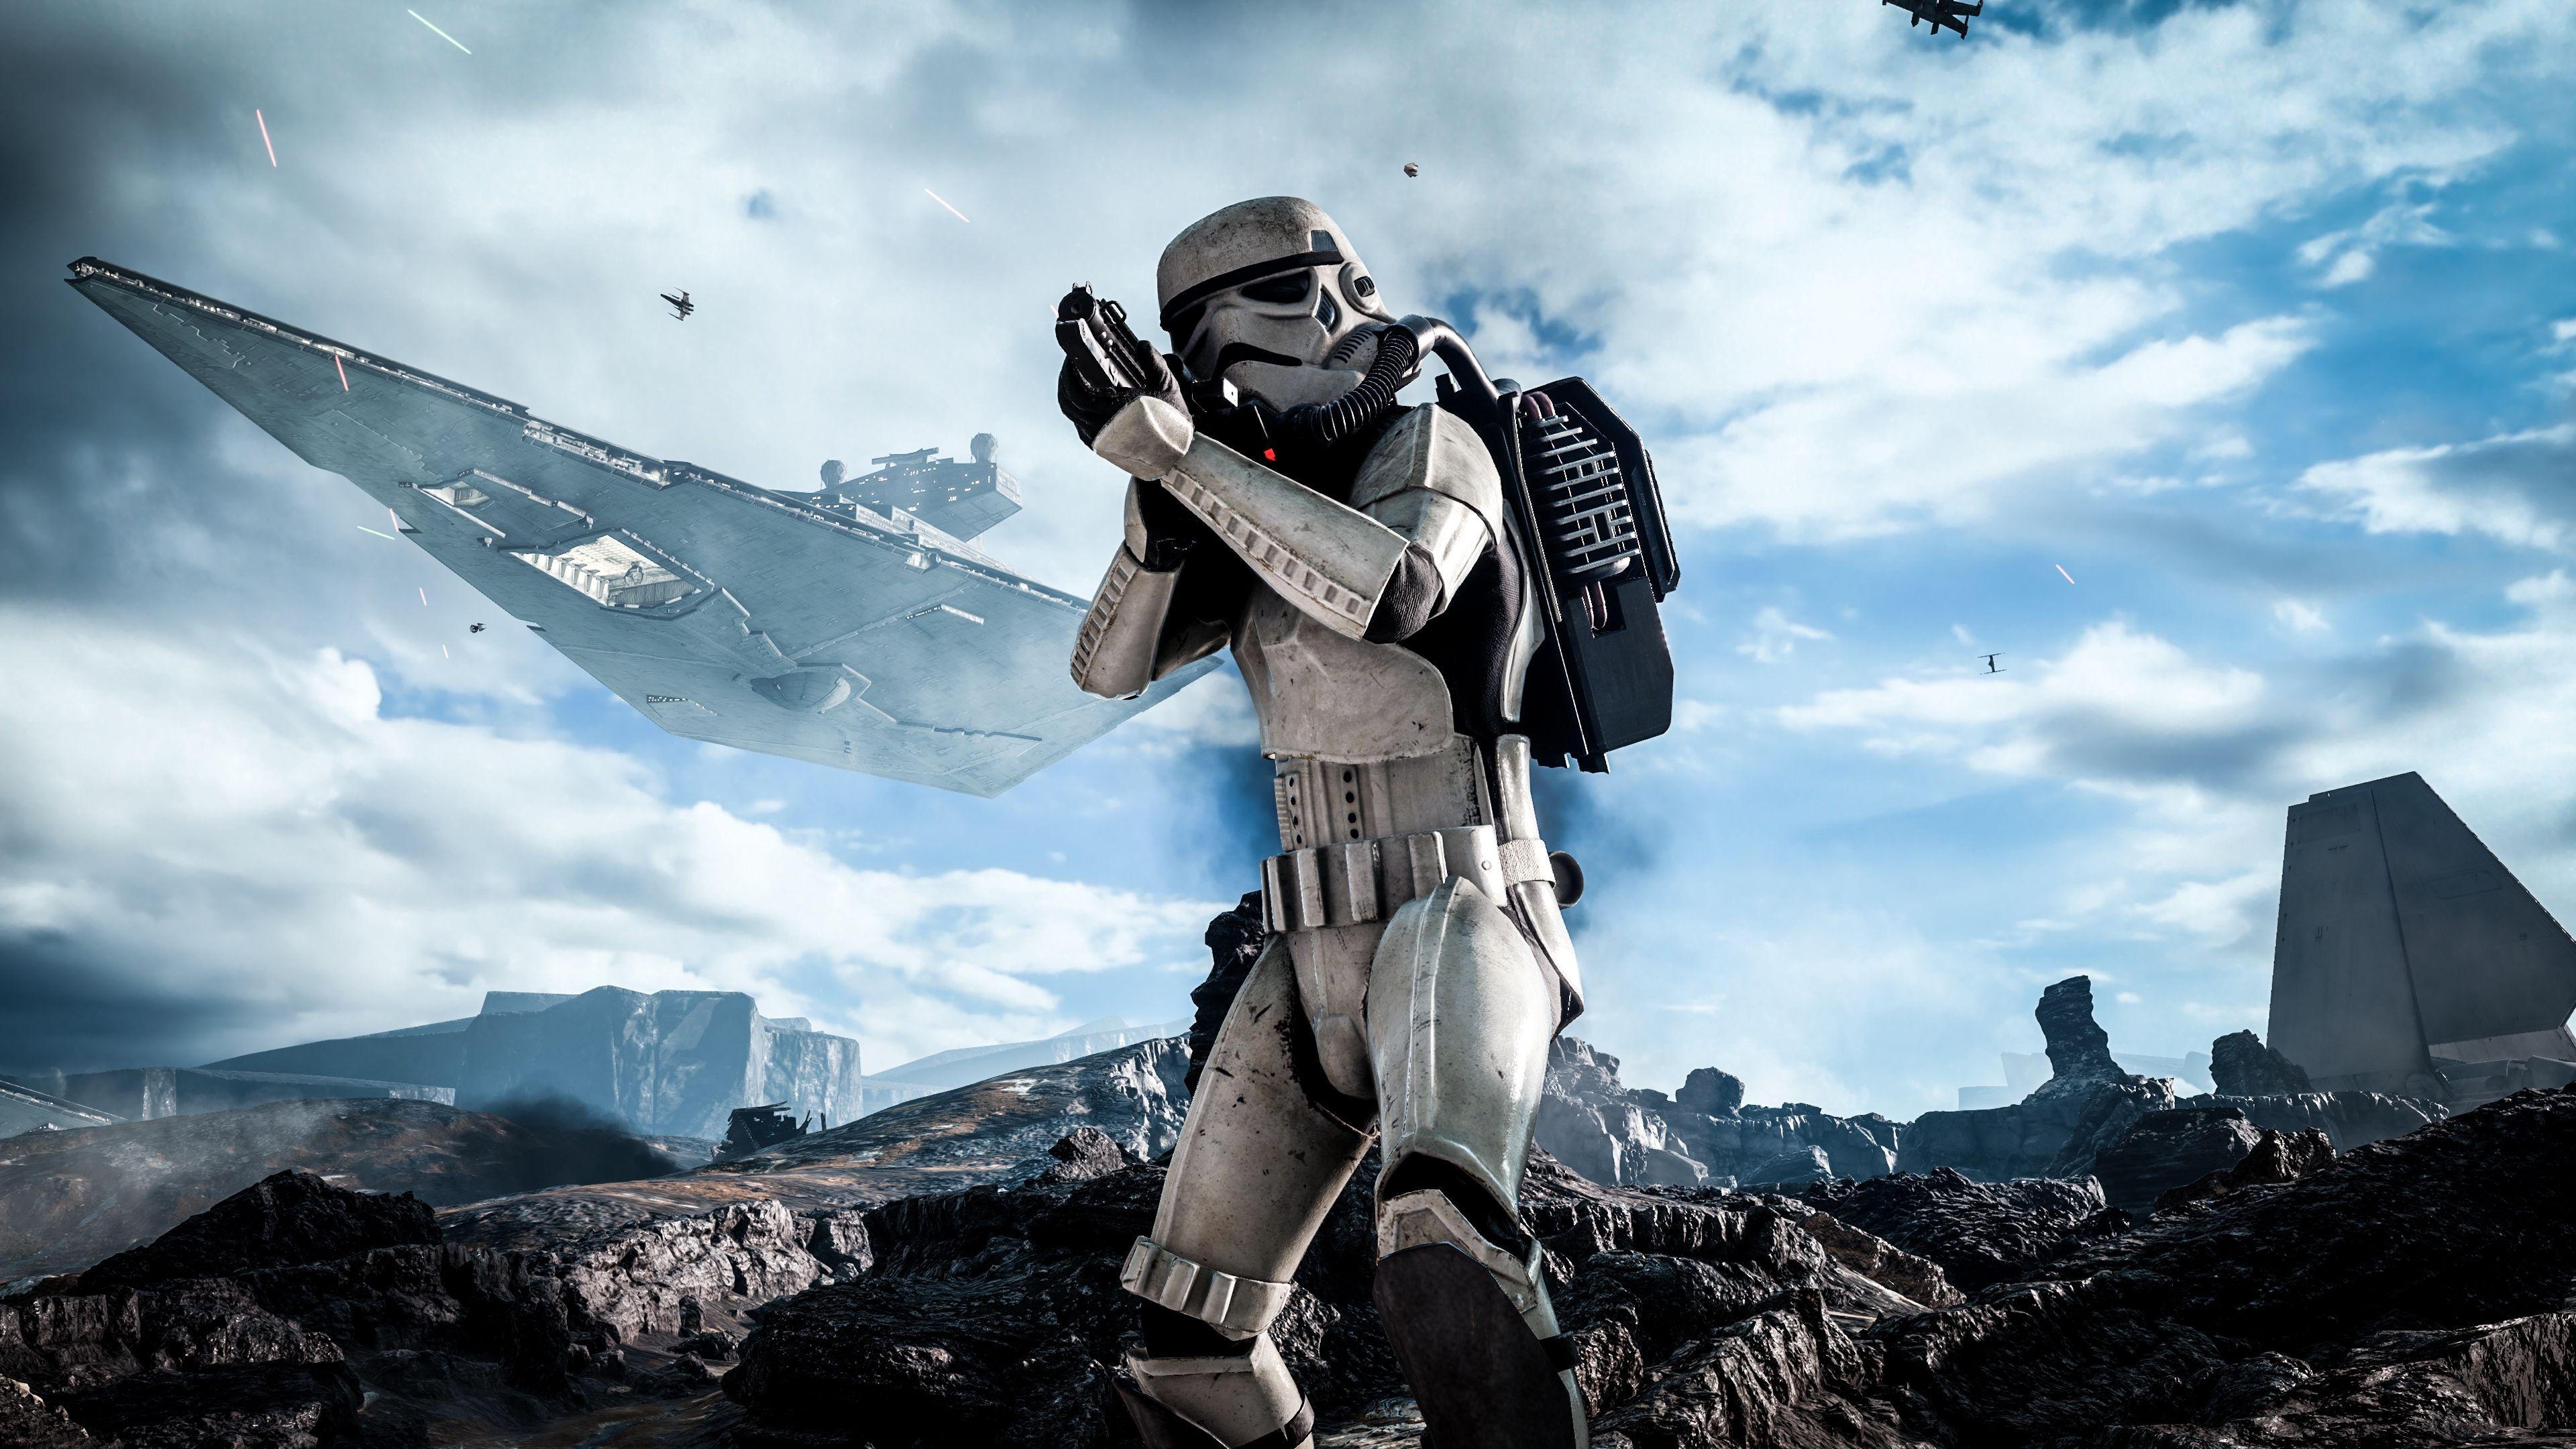 Download wallpapers 3840x2160 star wars, battlefront, electronic arts